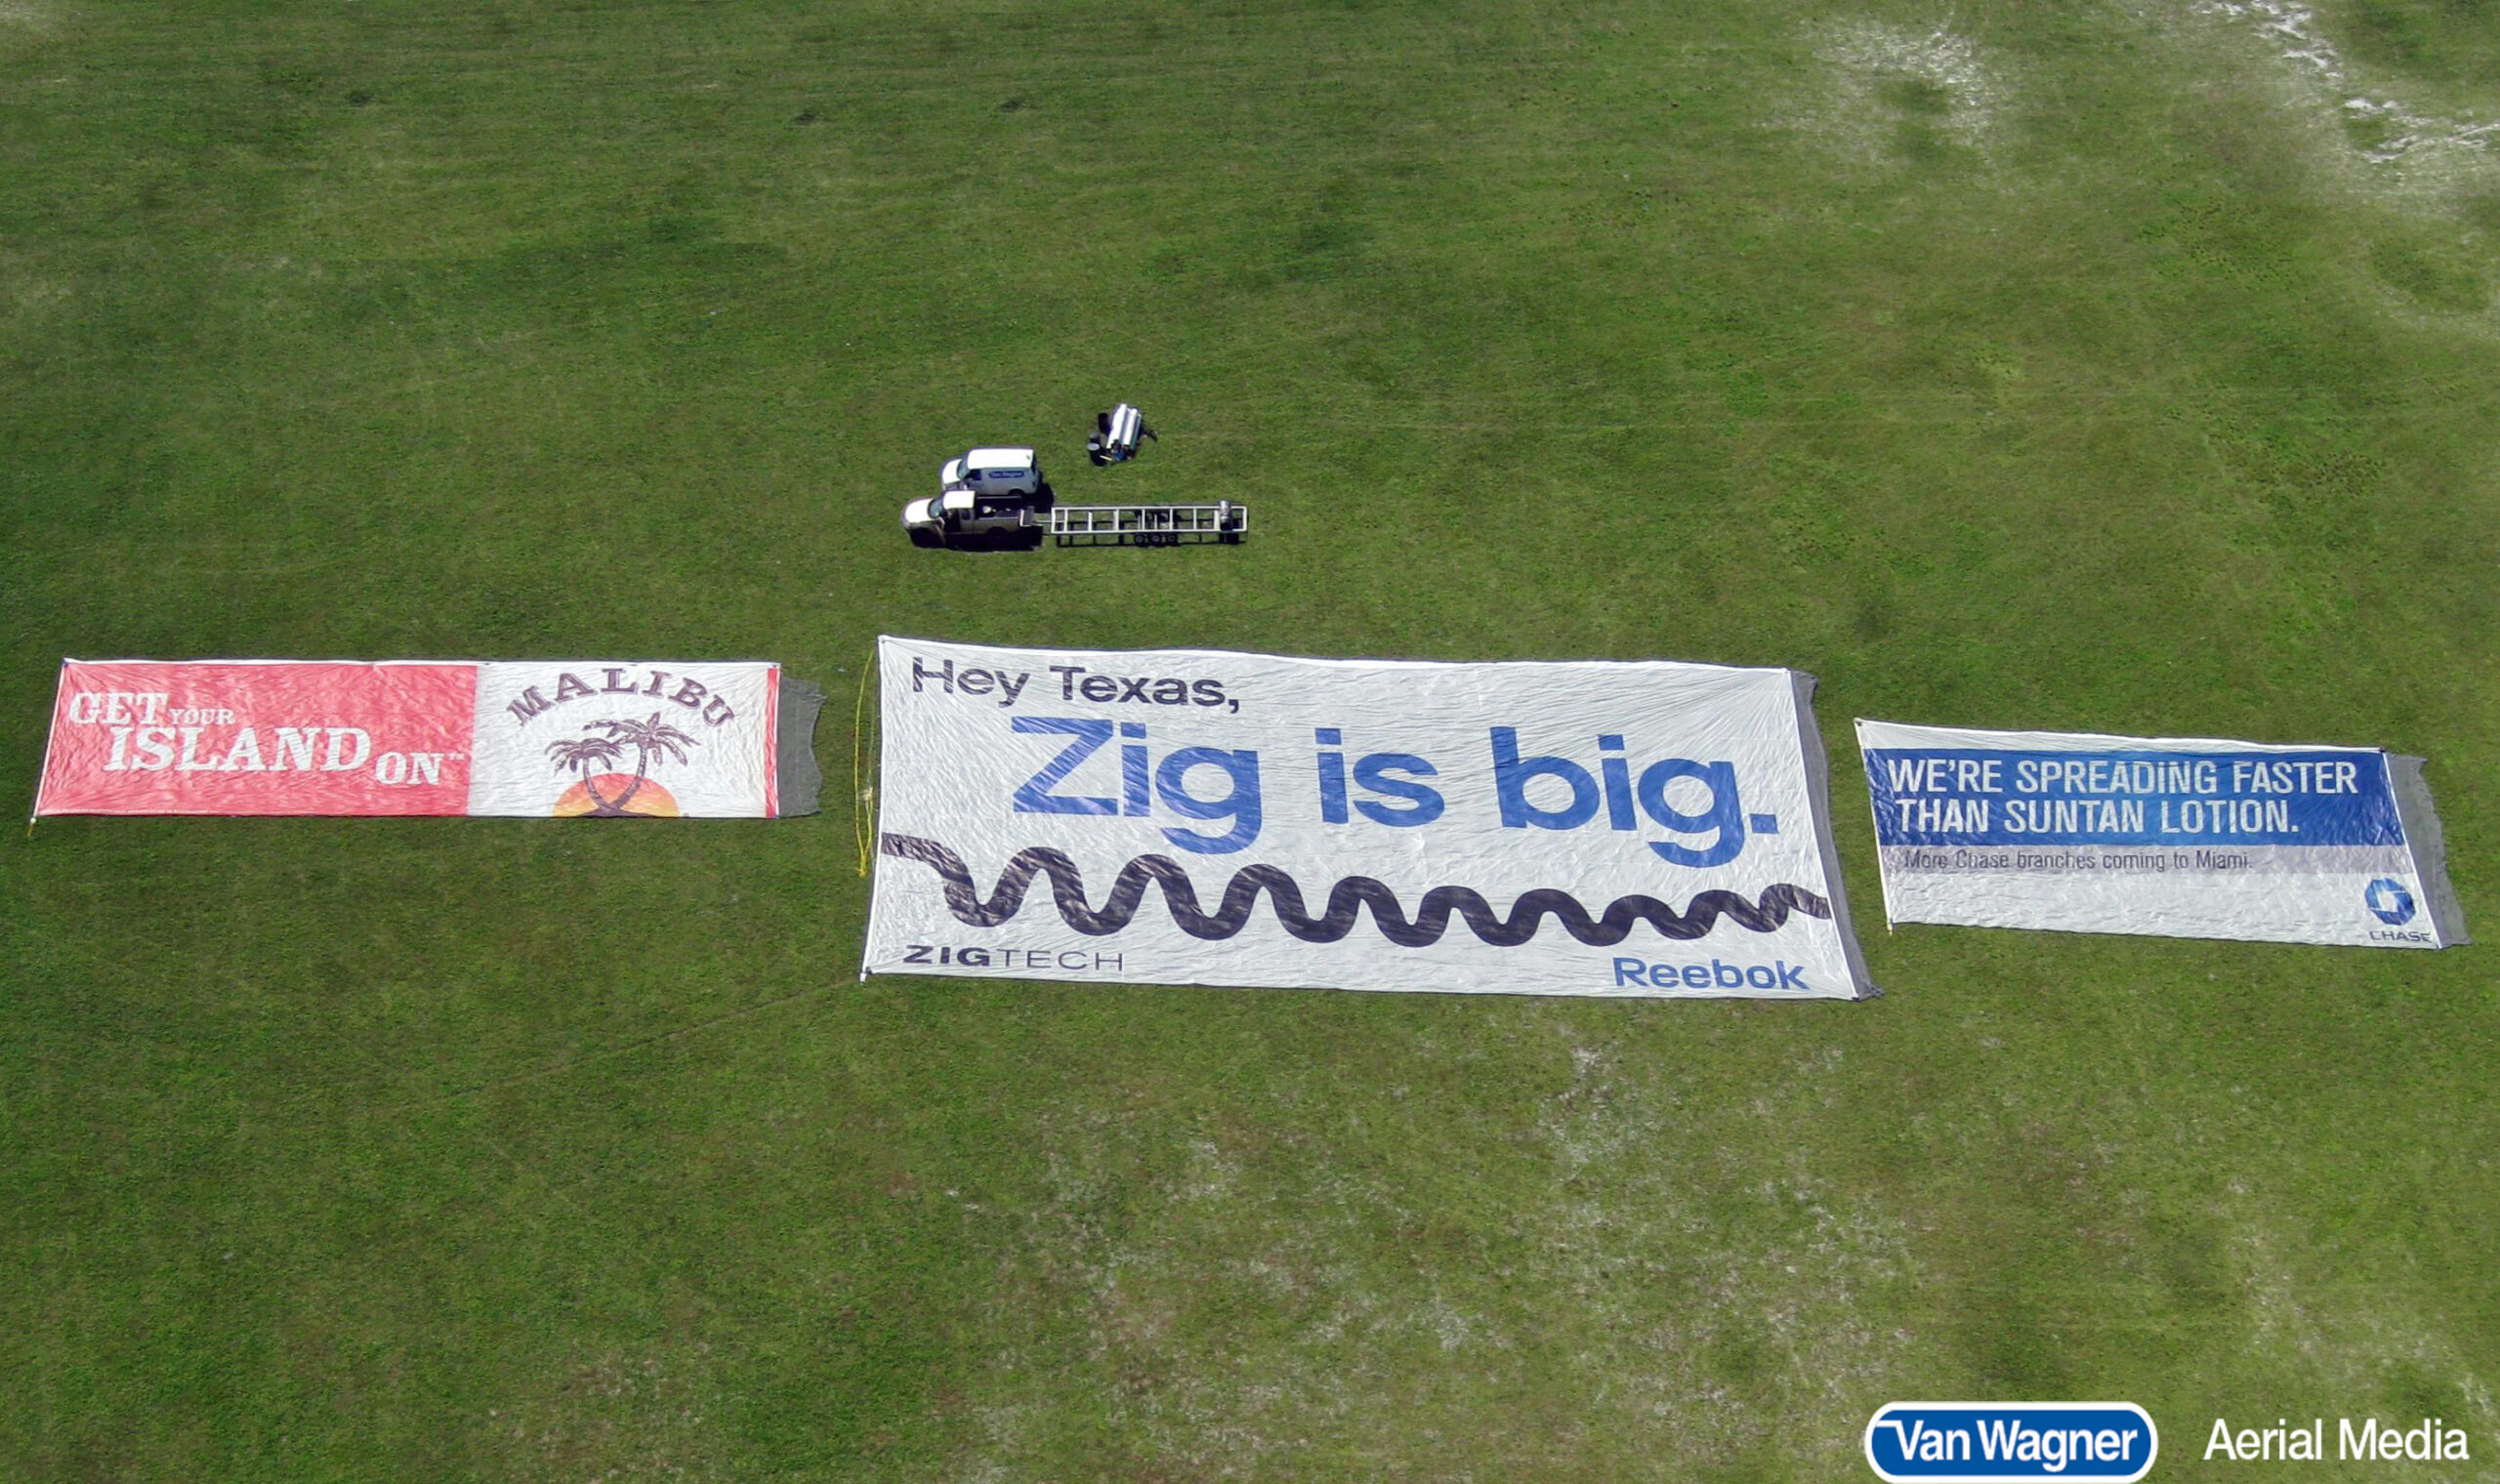 5 Steps To Building Brand Awareness With Aerial Advertising featured image